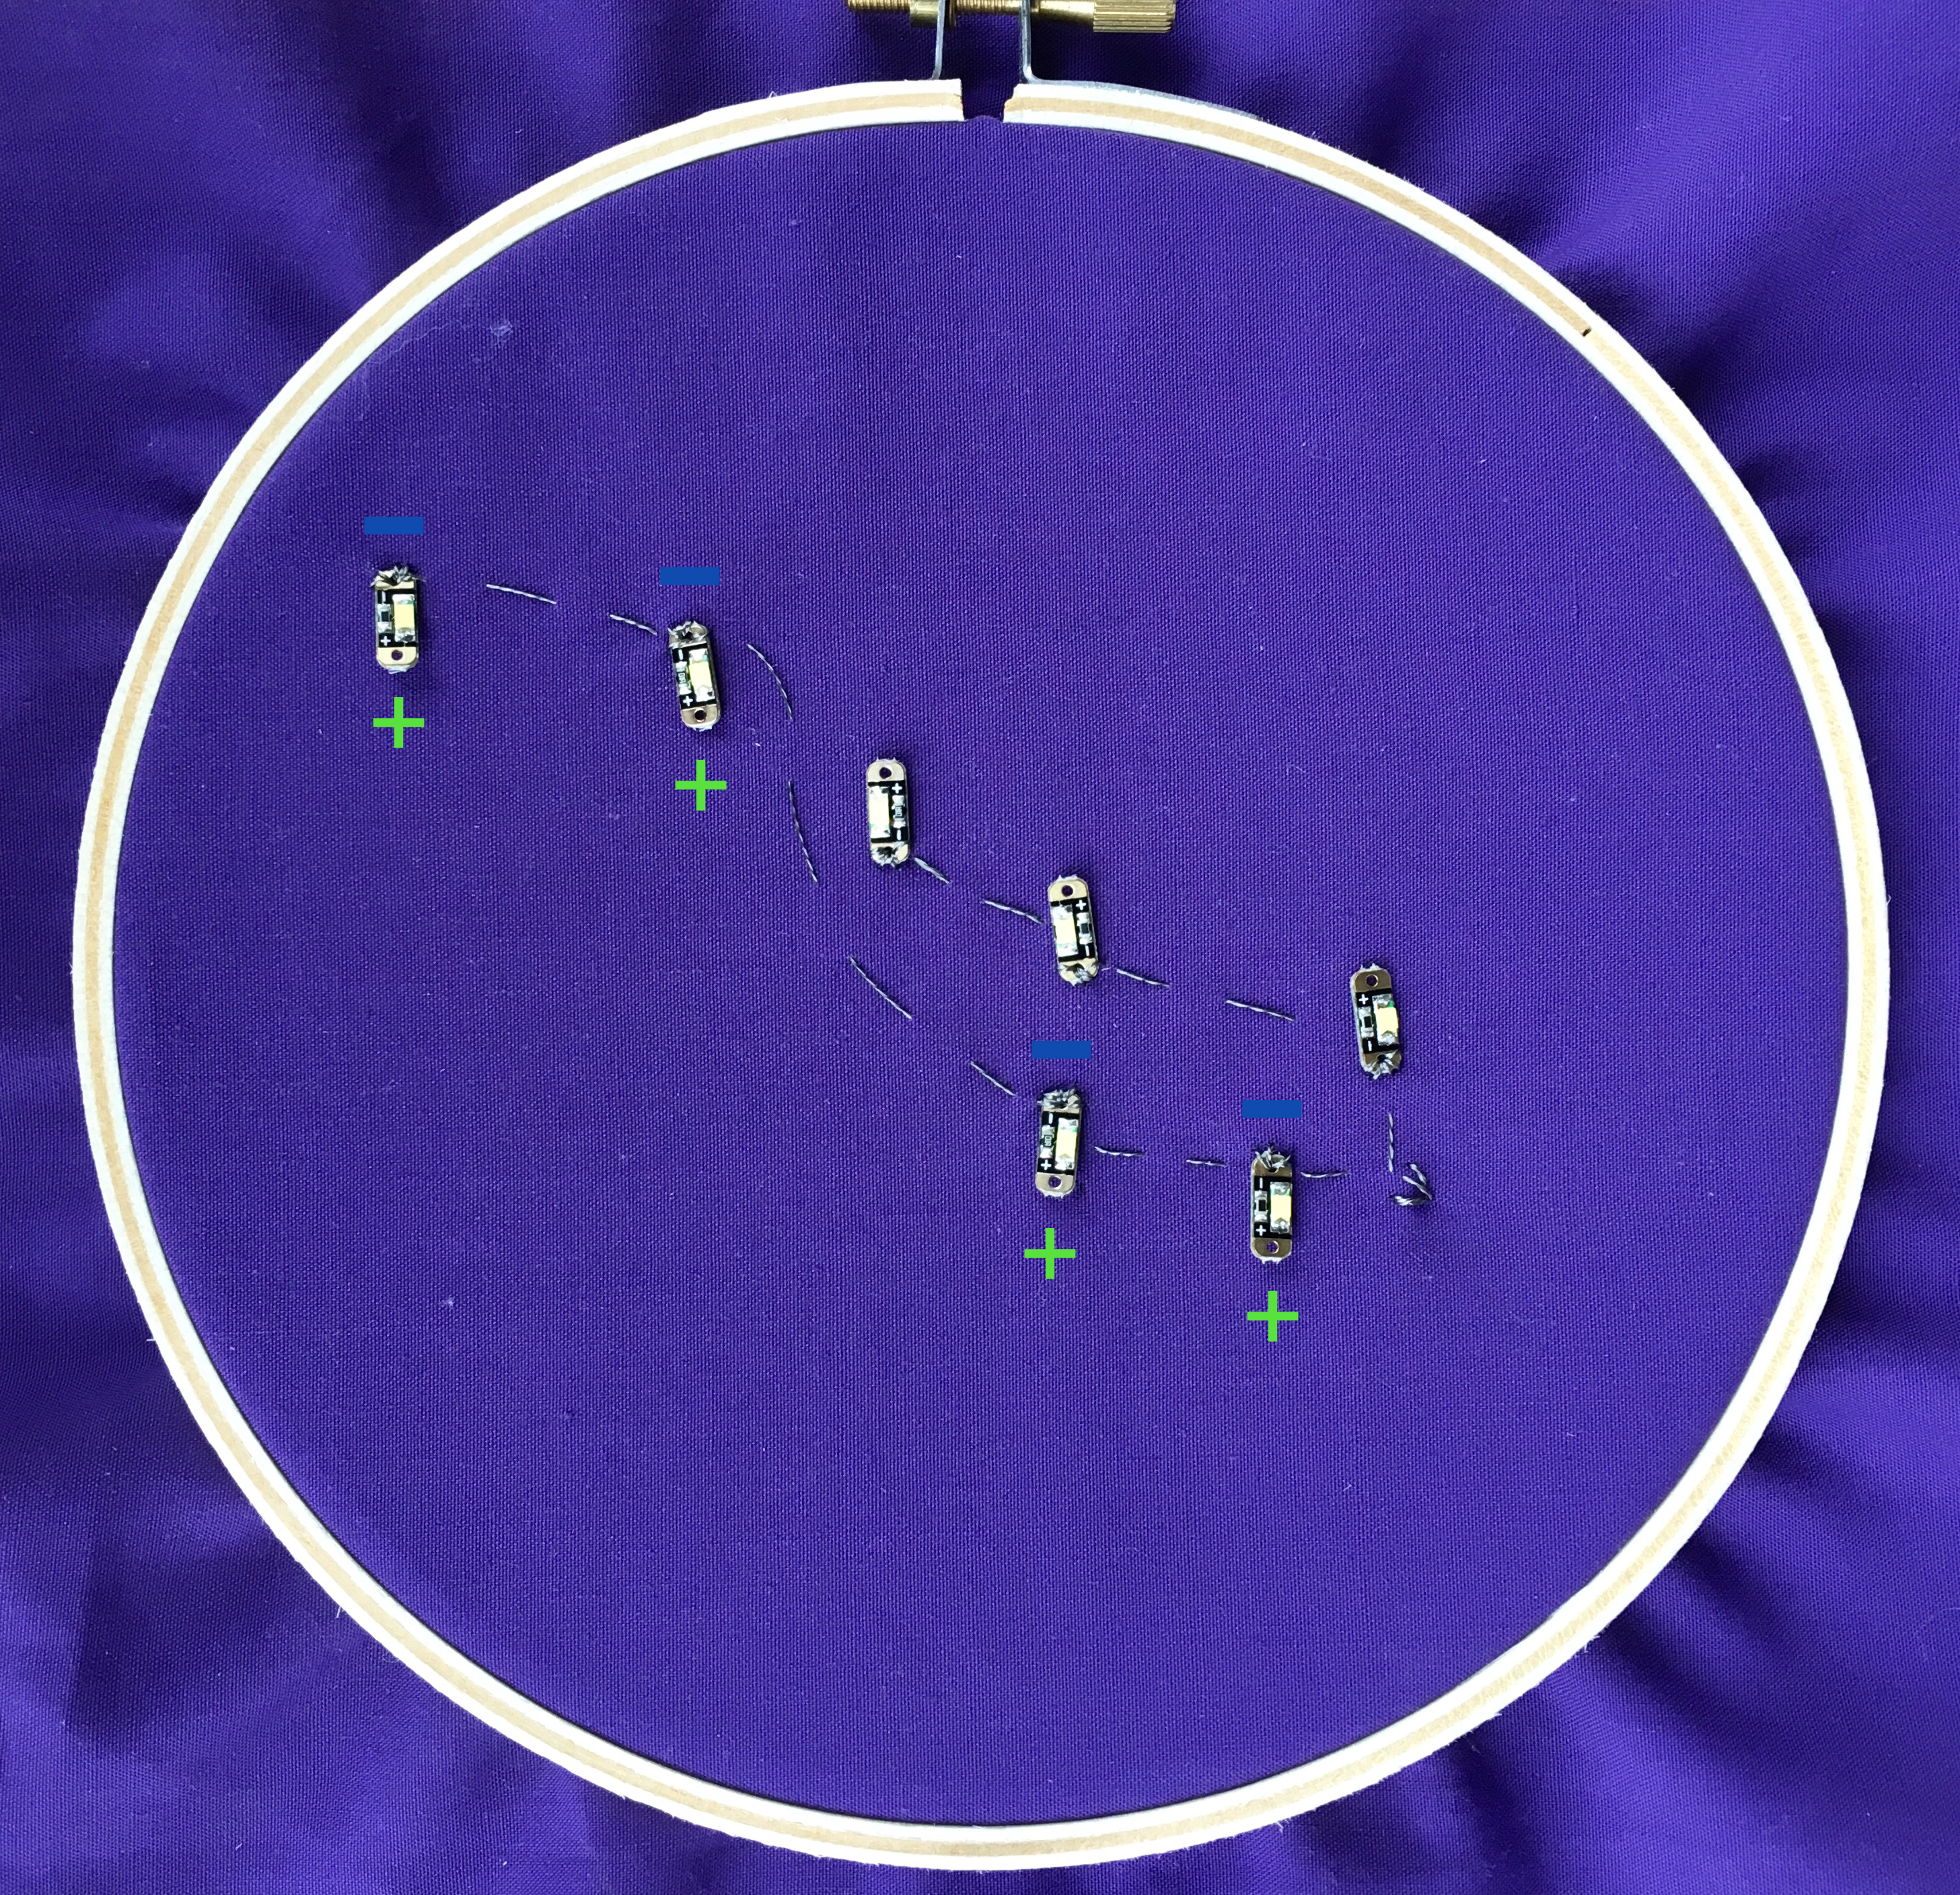 Embroidery roadmap: ground terminals